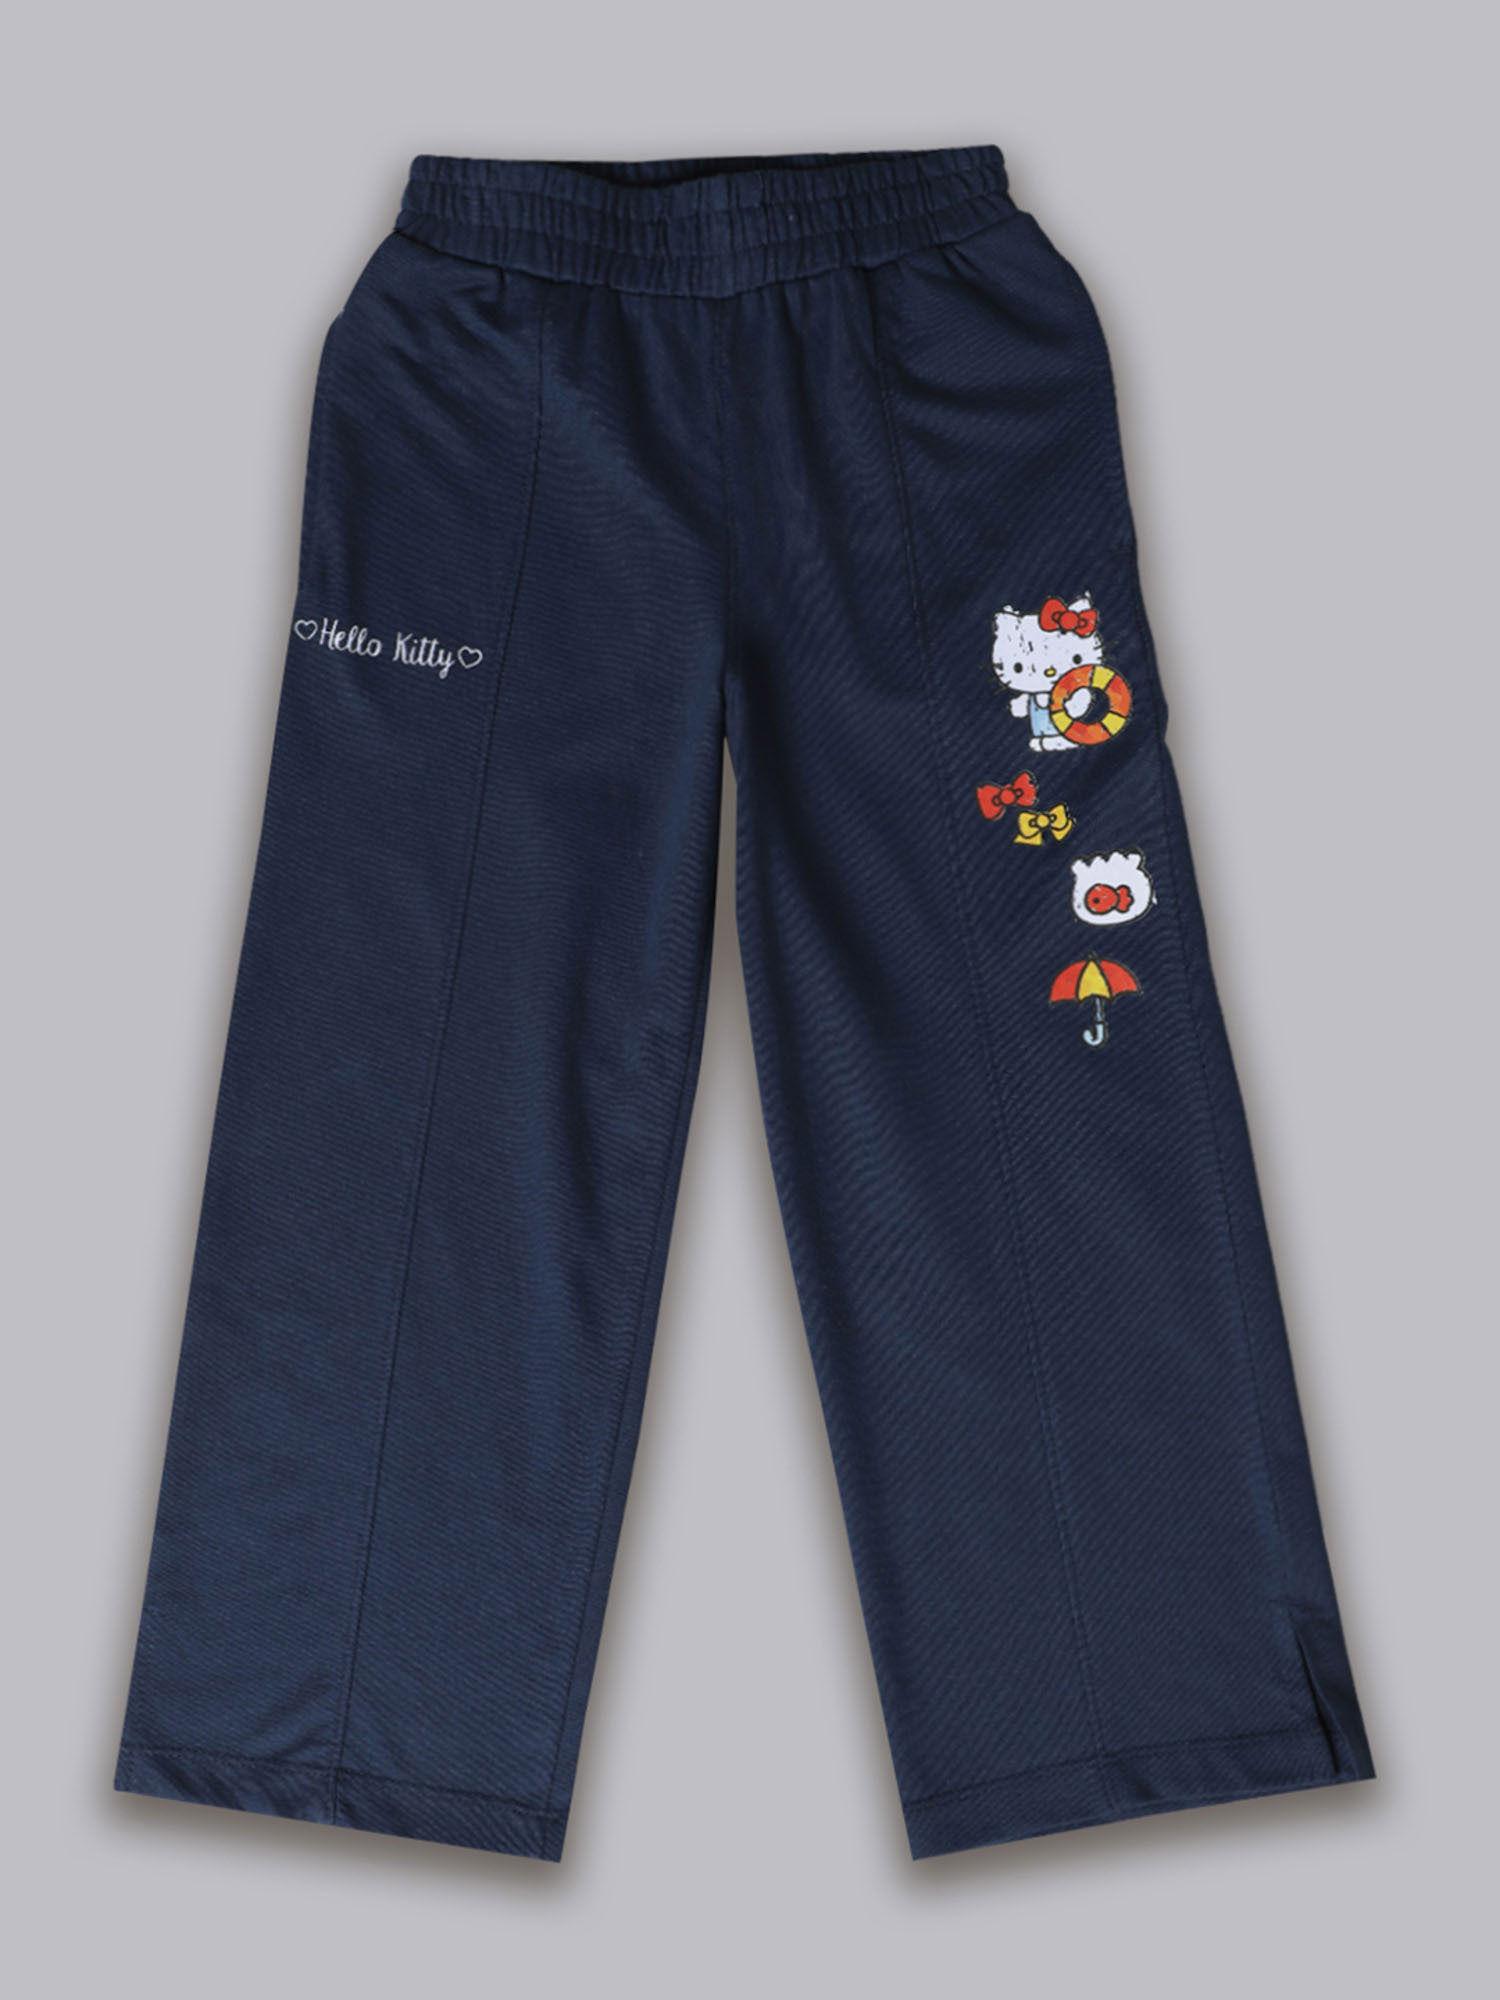 hello kitty printed navy blue jogger for girls